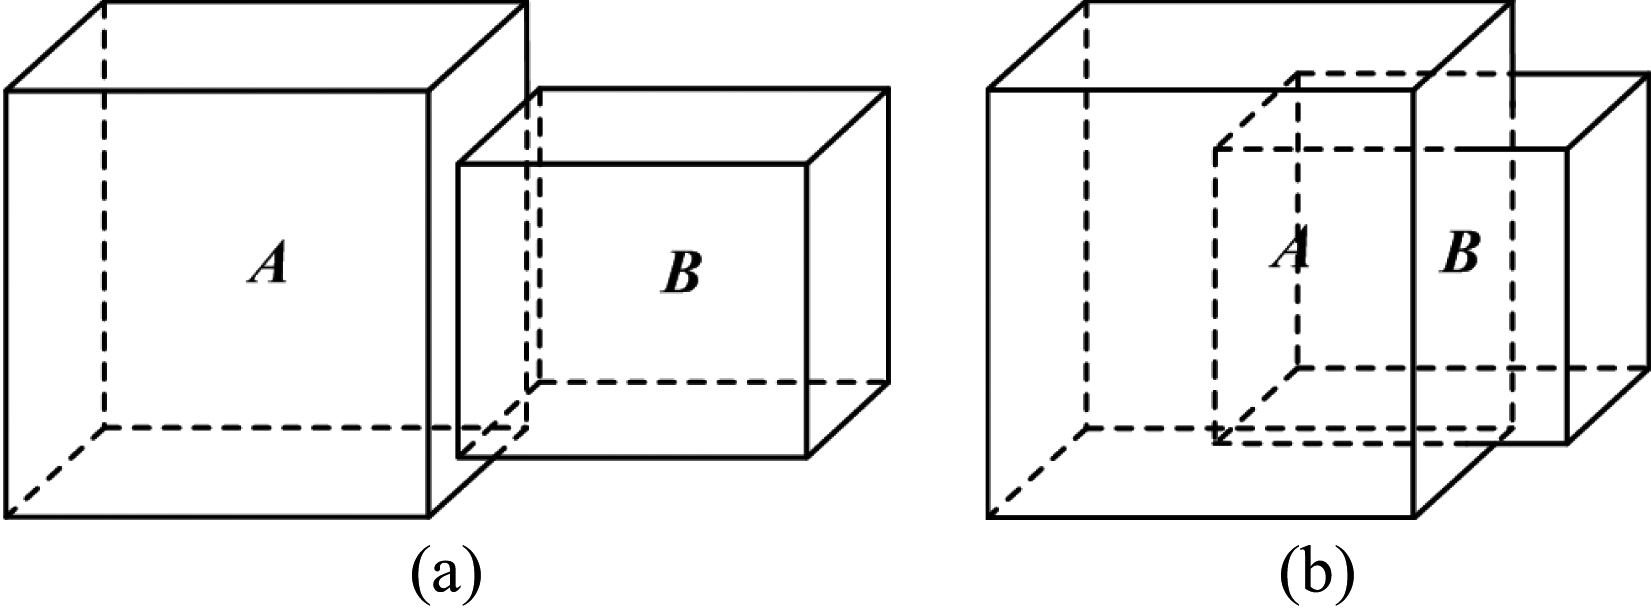 The spatial relations between A and B: (a) nonoverlapping; (b) overlapping.